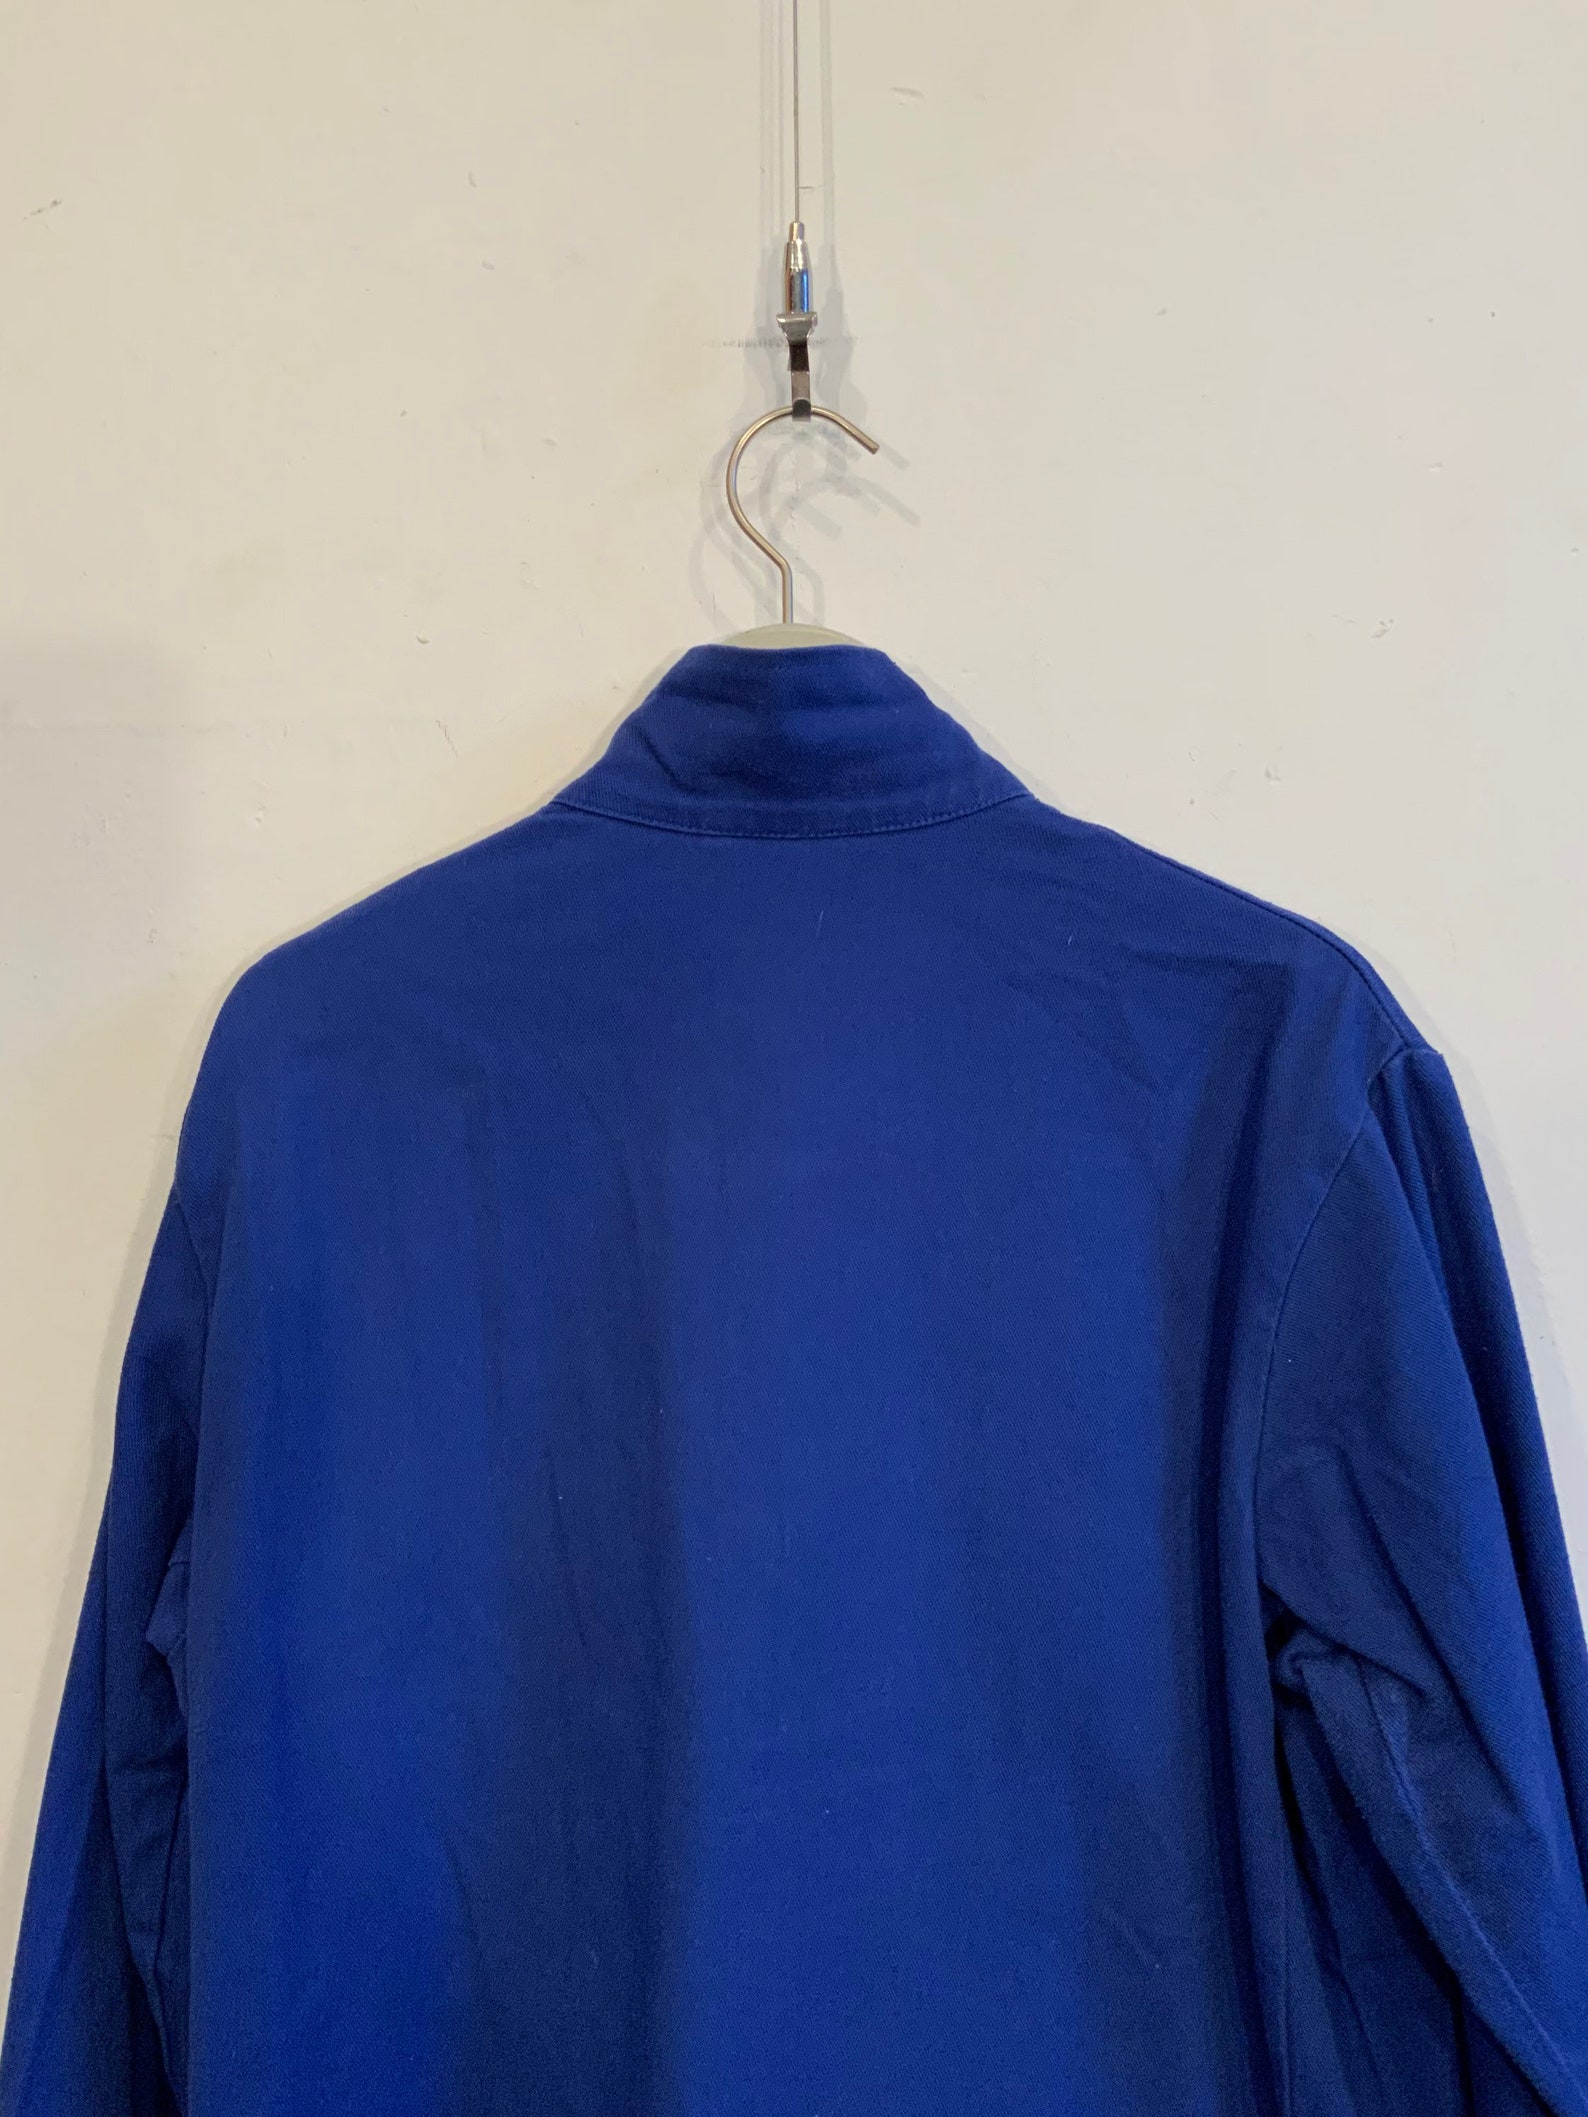 Spilag Workwear Overalls, Electric Blue Cotton Drill, Signs of Wear ...